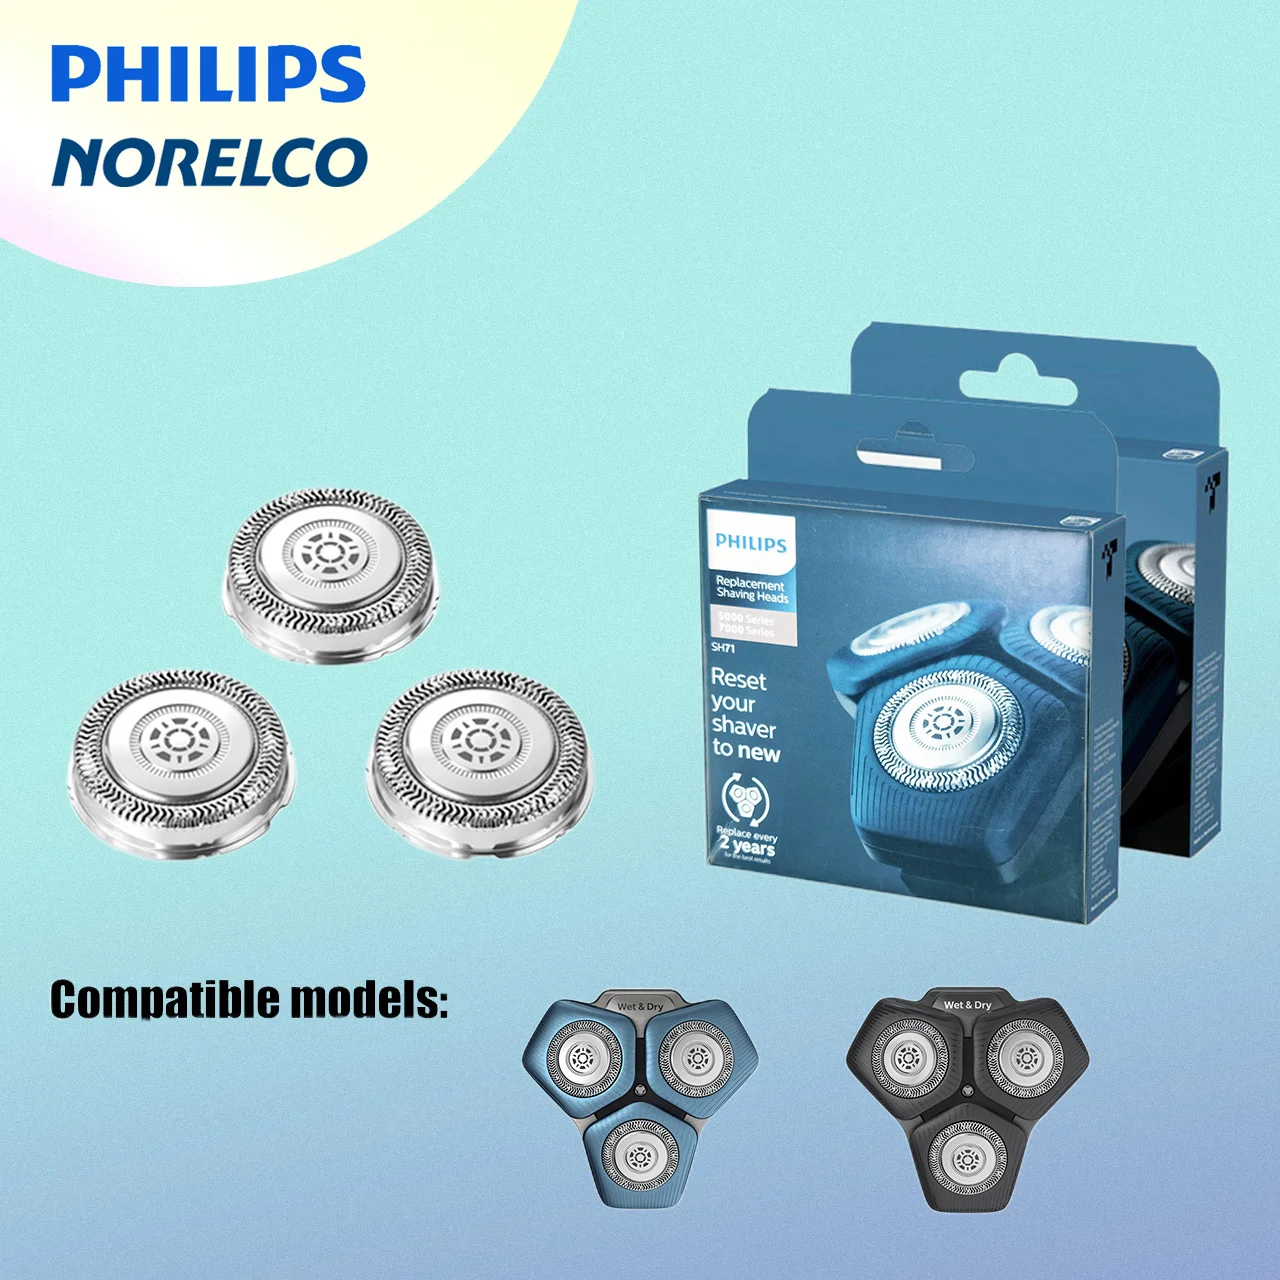 

Philips Norelco Genuine SH71/52 Shaving Heads compatible with Norelco Shaver Series 5000 Angular and 7000